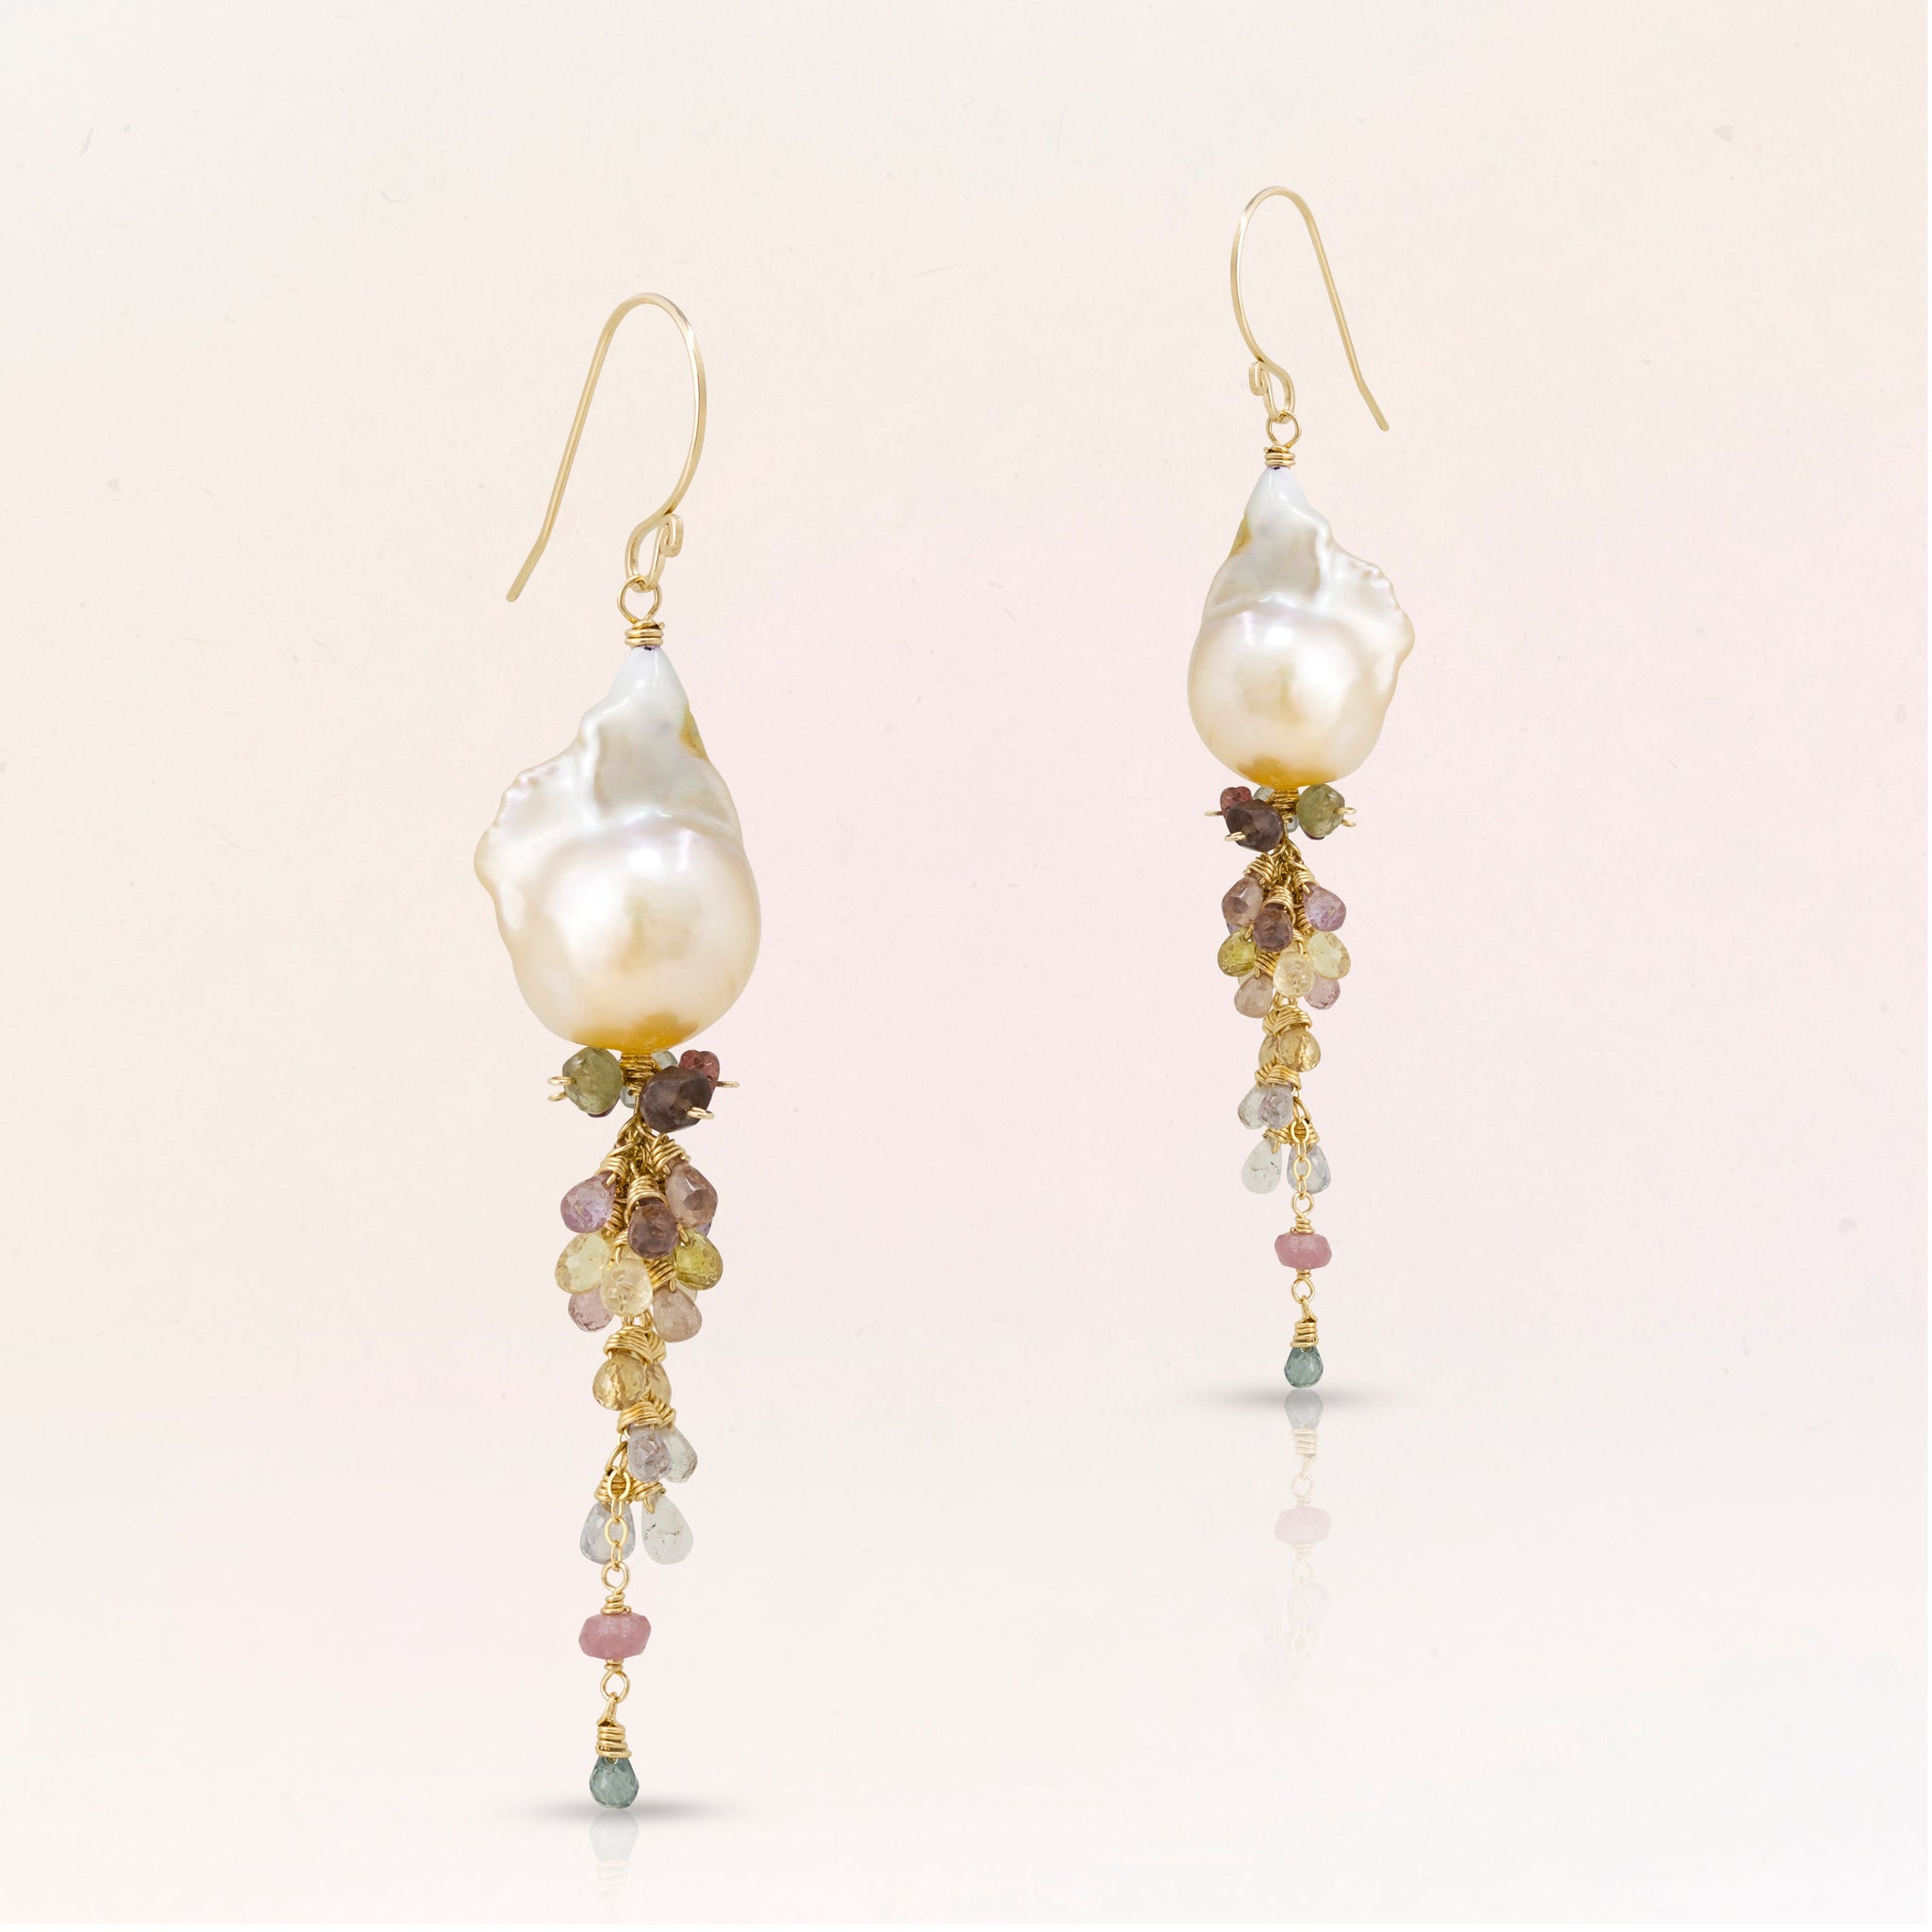 Baroque Pearl Earrings with Tourmaline Cluster